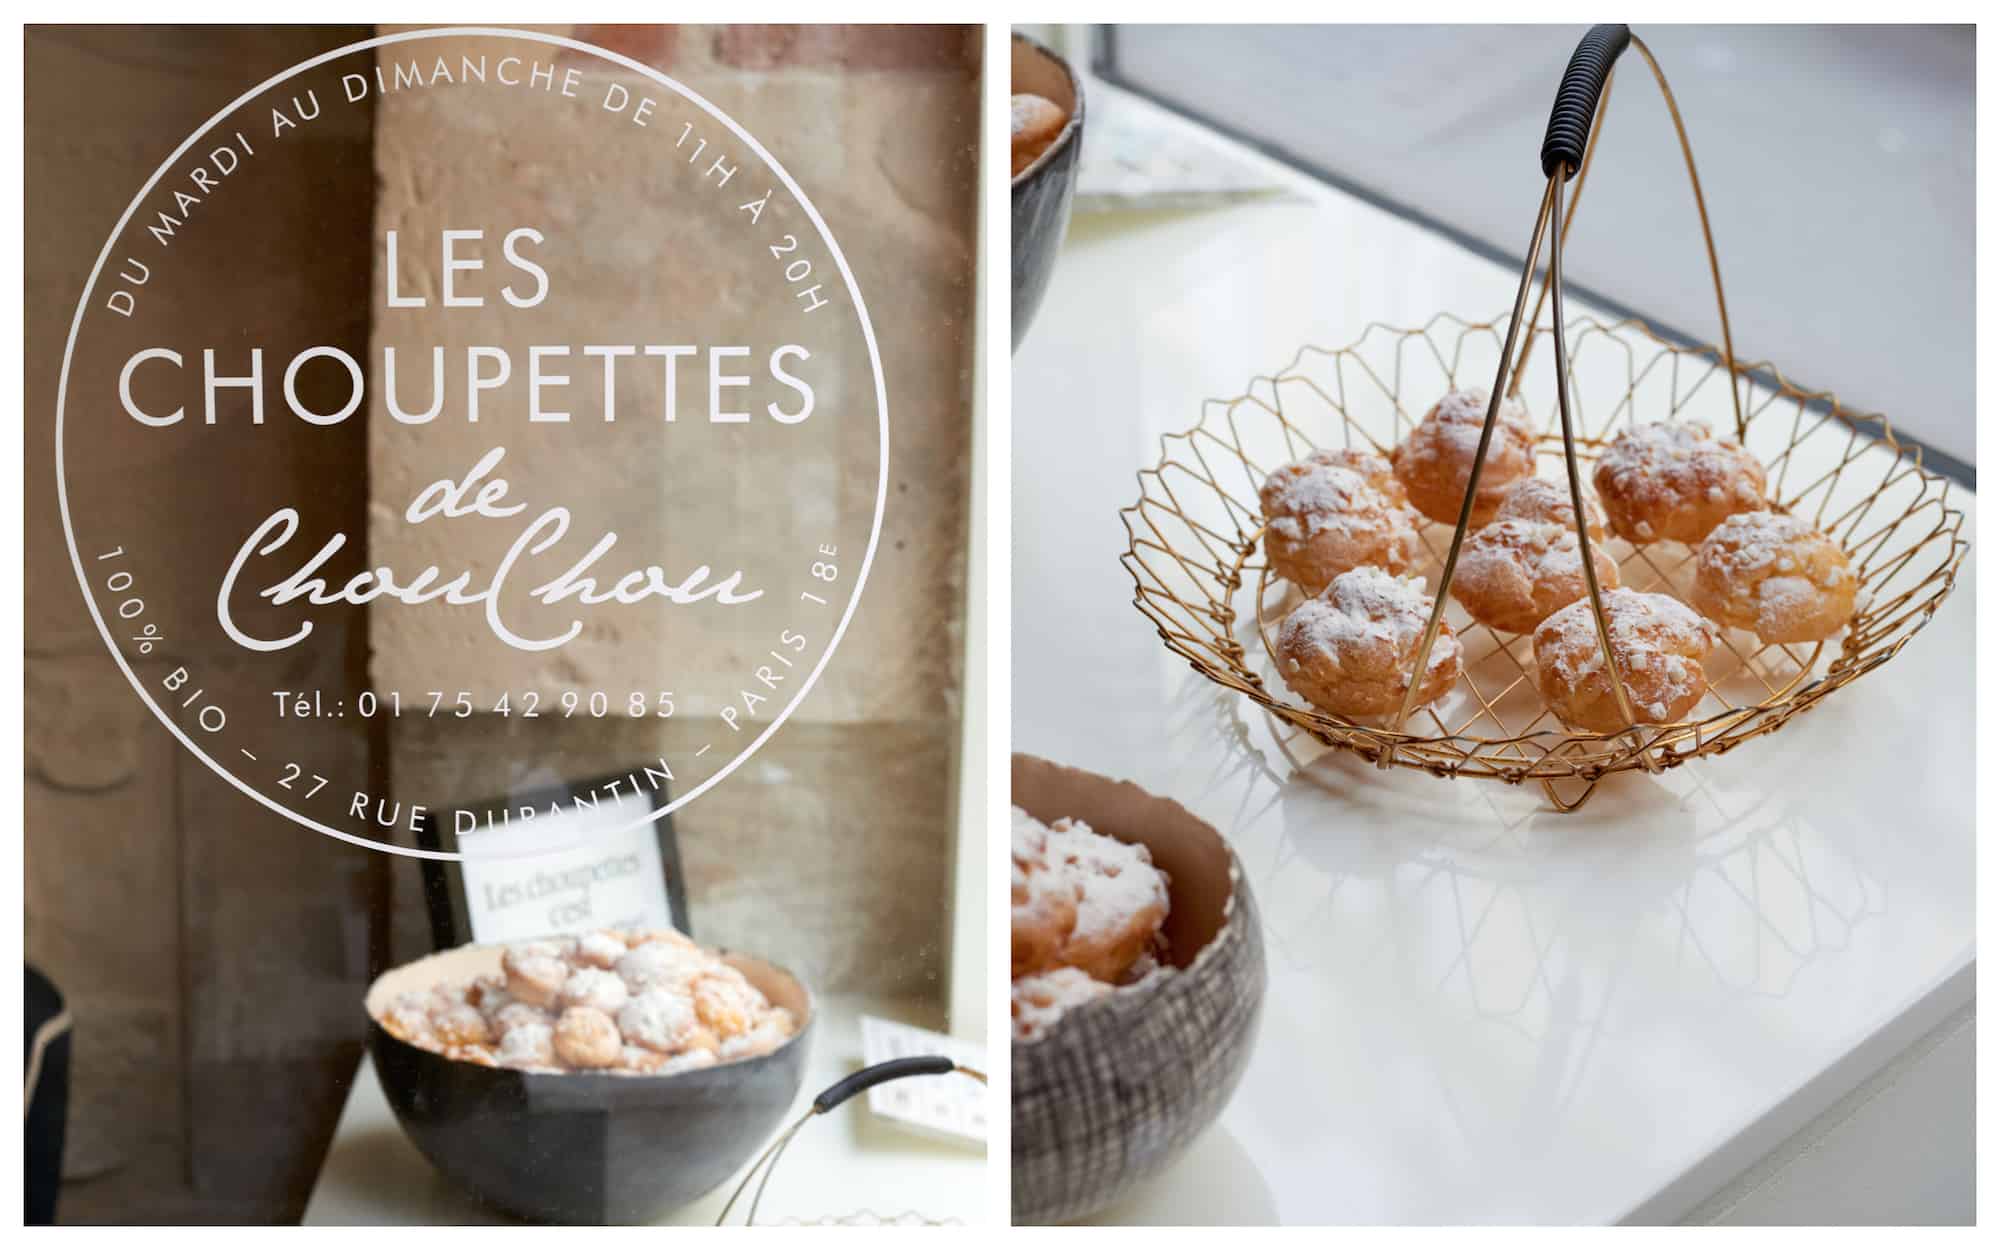 Les Choupettes de ChouChou: Organic Puff Pastry and Chantilly Cream in Montmartre